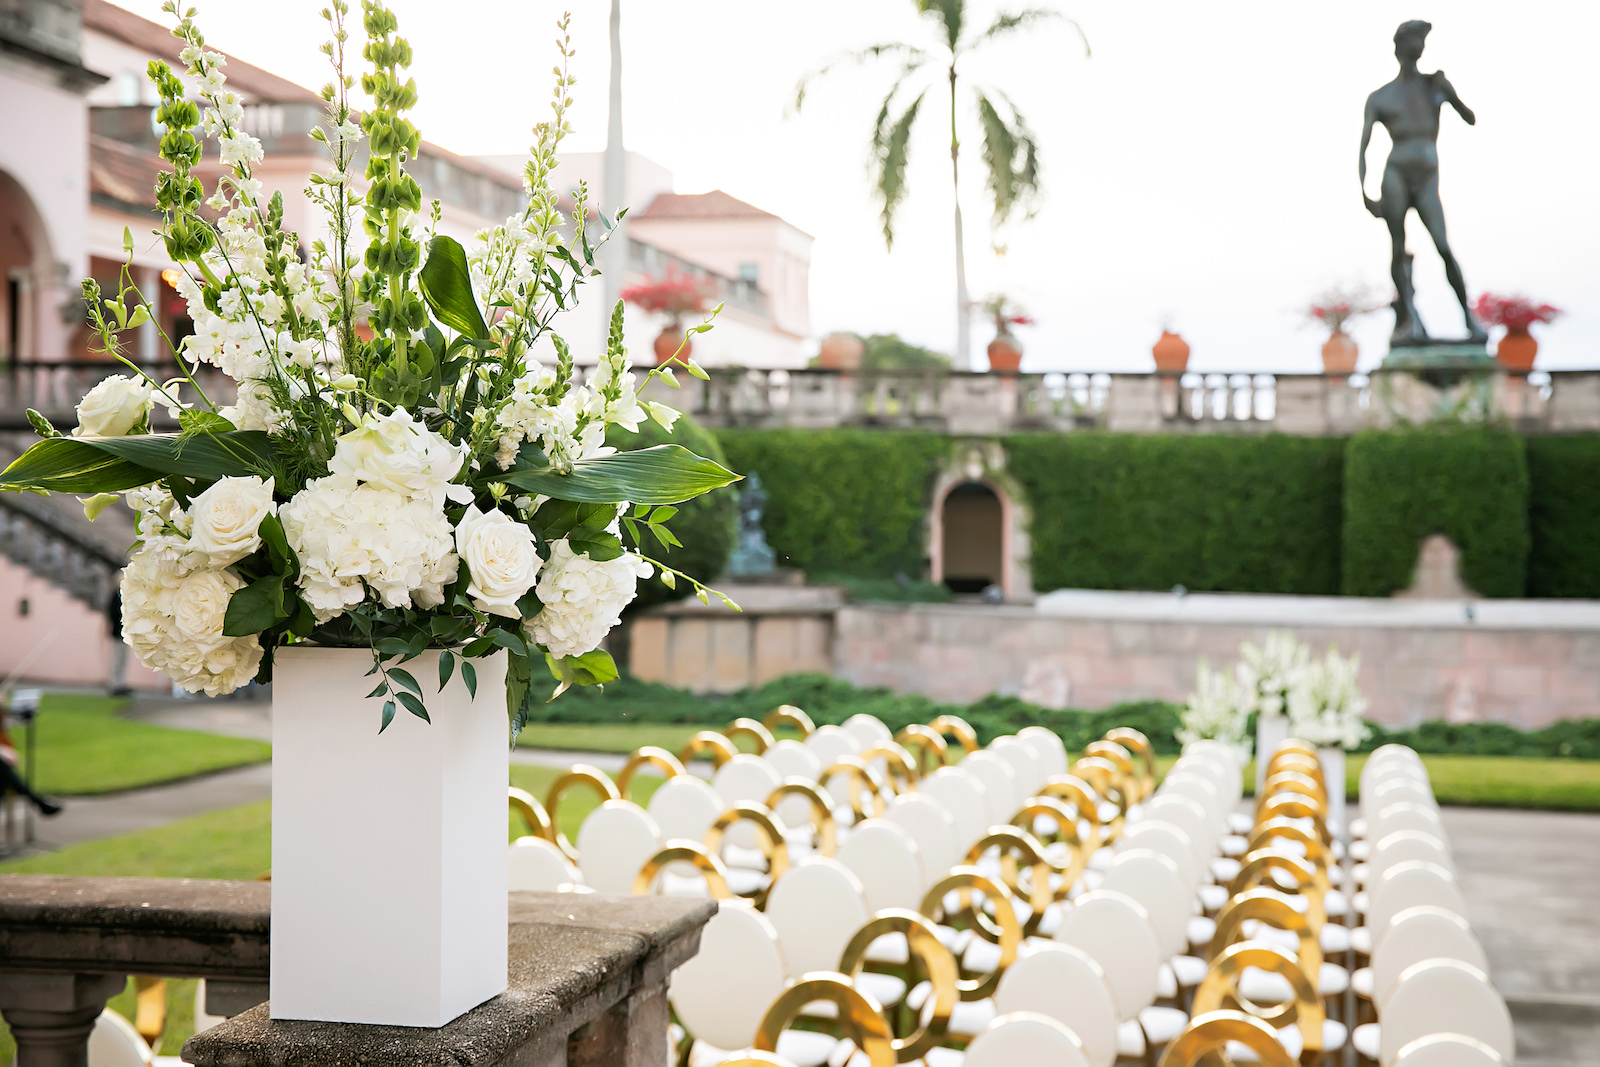 Luxurious Modern Chic Outdoor Courtyard Wedding Ceremony Decor, White Pedestal with Lush White Hydrangeas, Roses and Greenery Floral Arrangement, White and Gold Chairs | Tampa Bay Wedding Photographer Limelight Photography | Sarasota Wedding Venue Ringling Museum